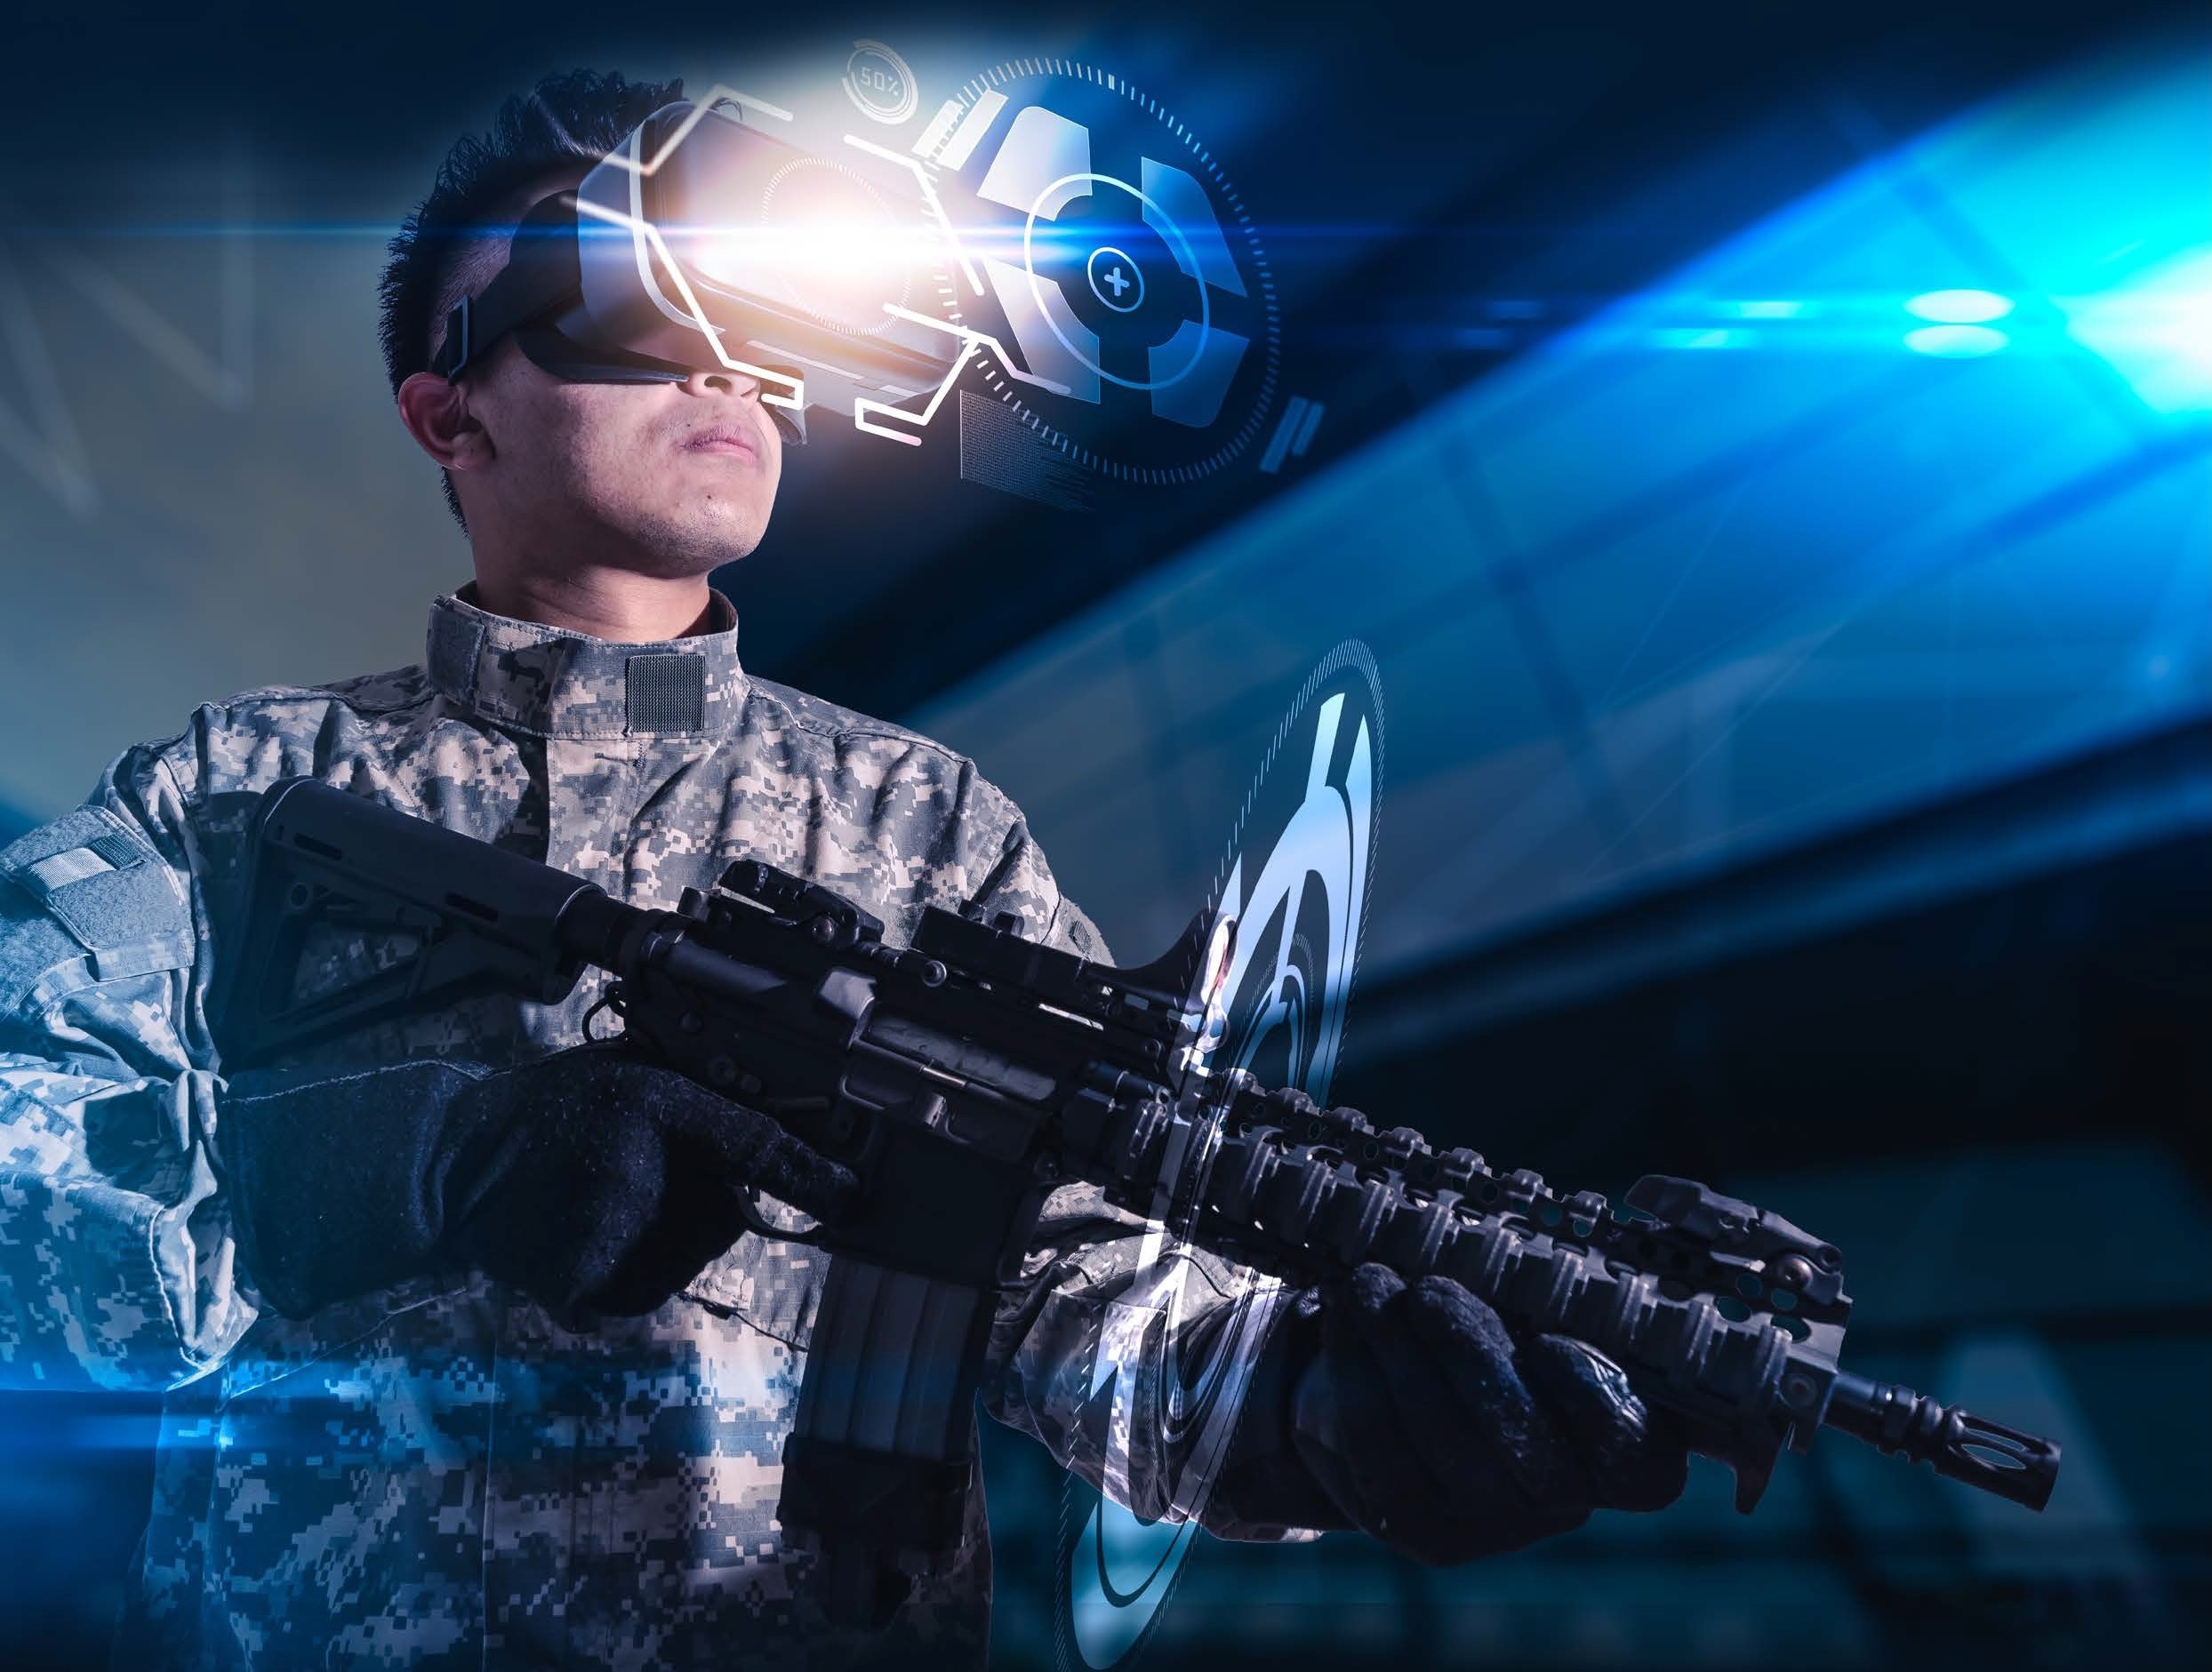 Defence iQ publishes guidance on getting innovations onto the battlefield